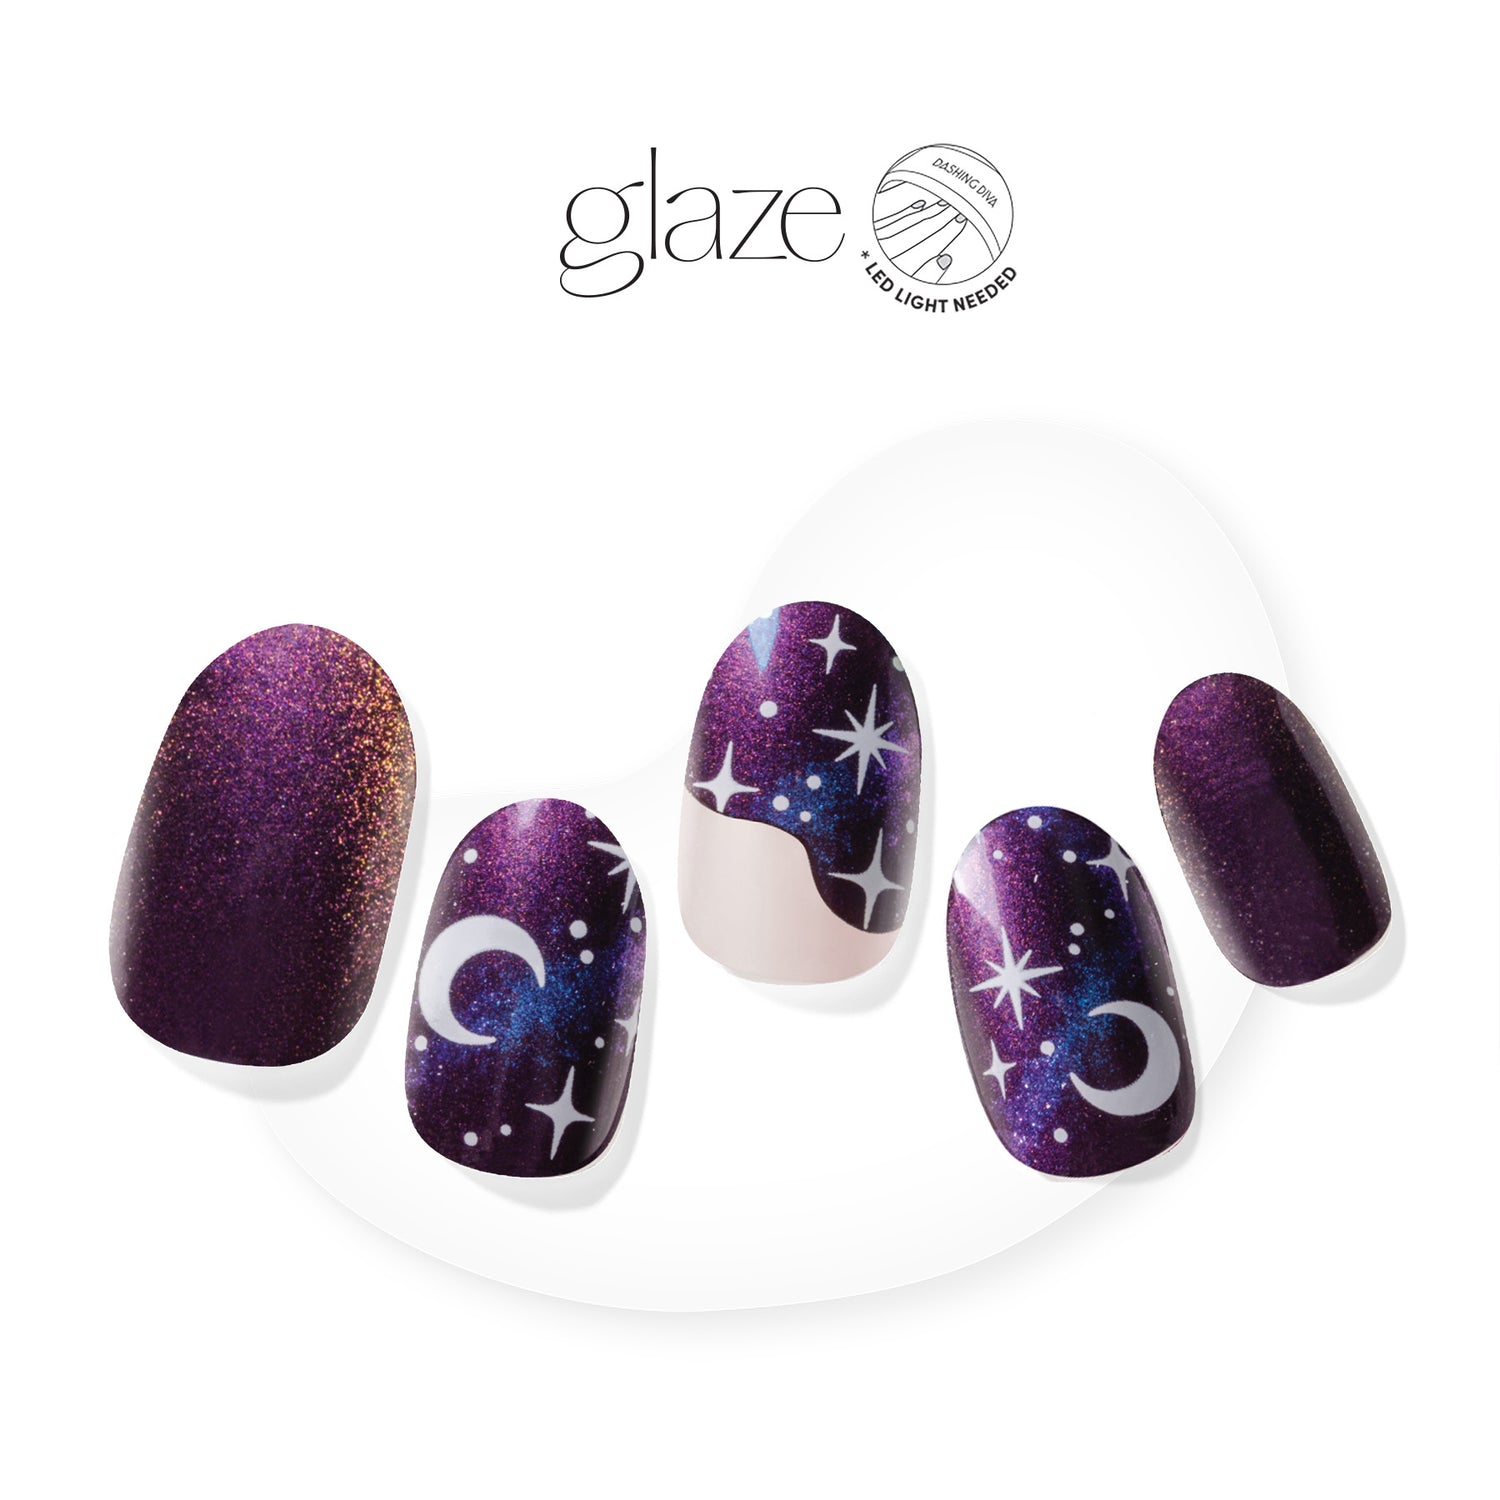  Add a little spice to your spell. Semi-cured clear & purple gel nail strips featuring a shimmery velvet effect, scalloped french tips, and starry icons with mega volume & maximum shine.